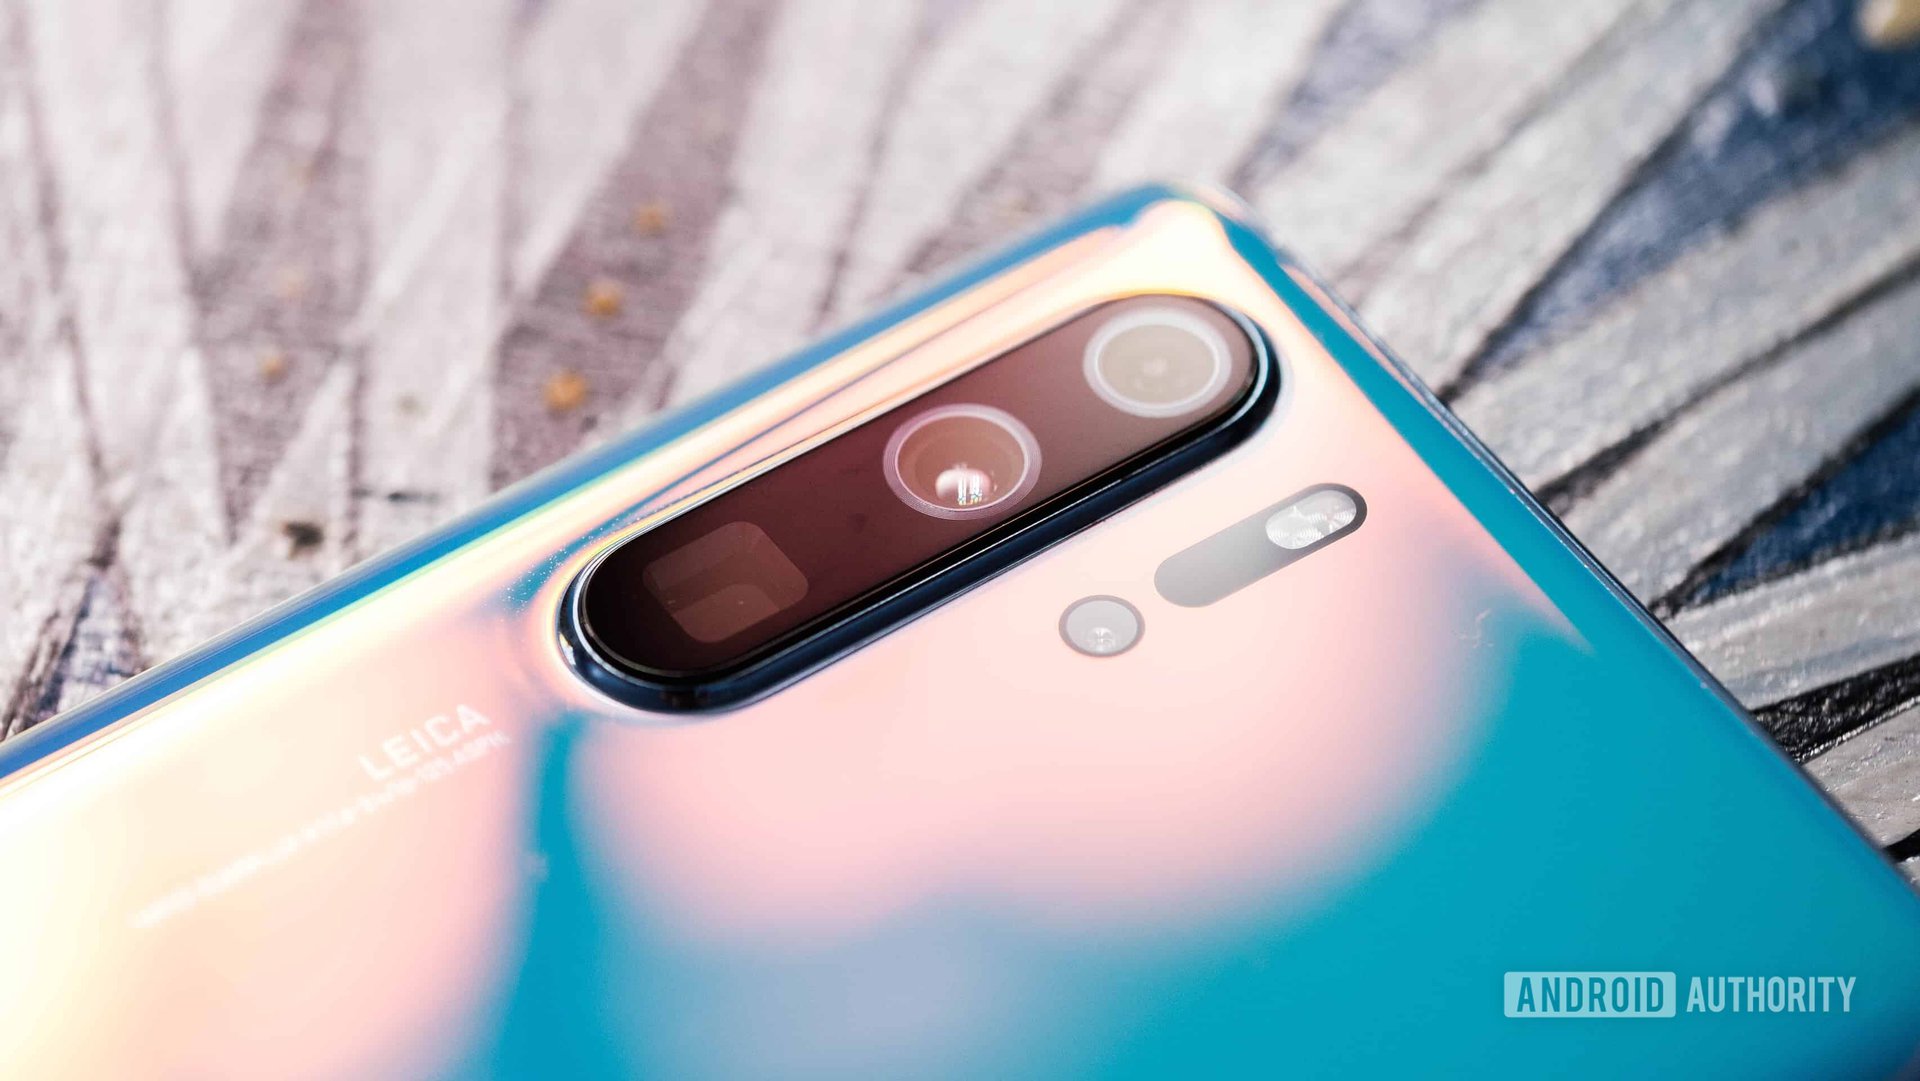 Huawei P30 lite - Full phone specifications